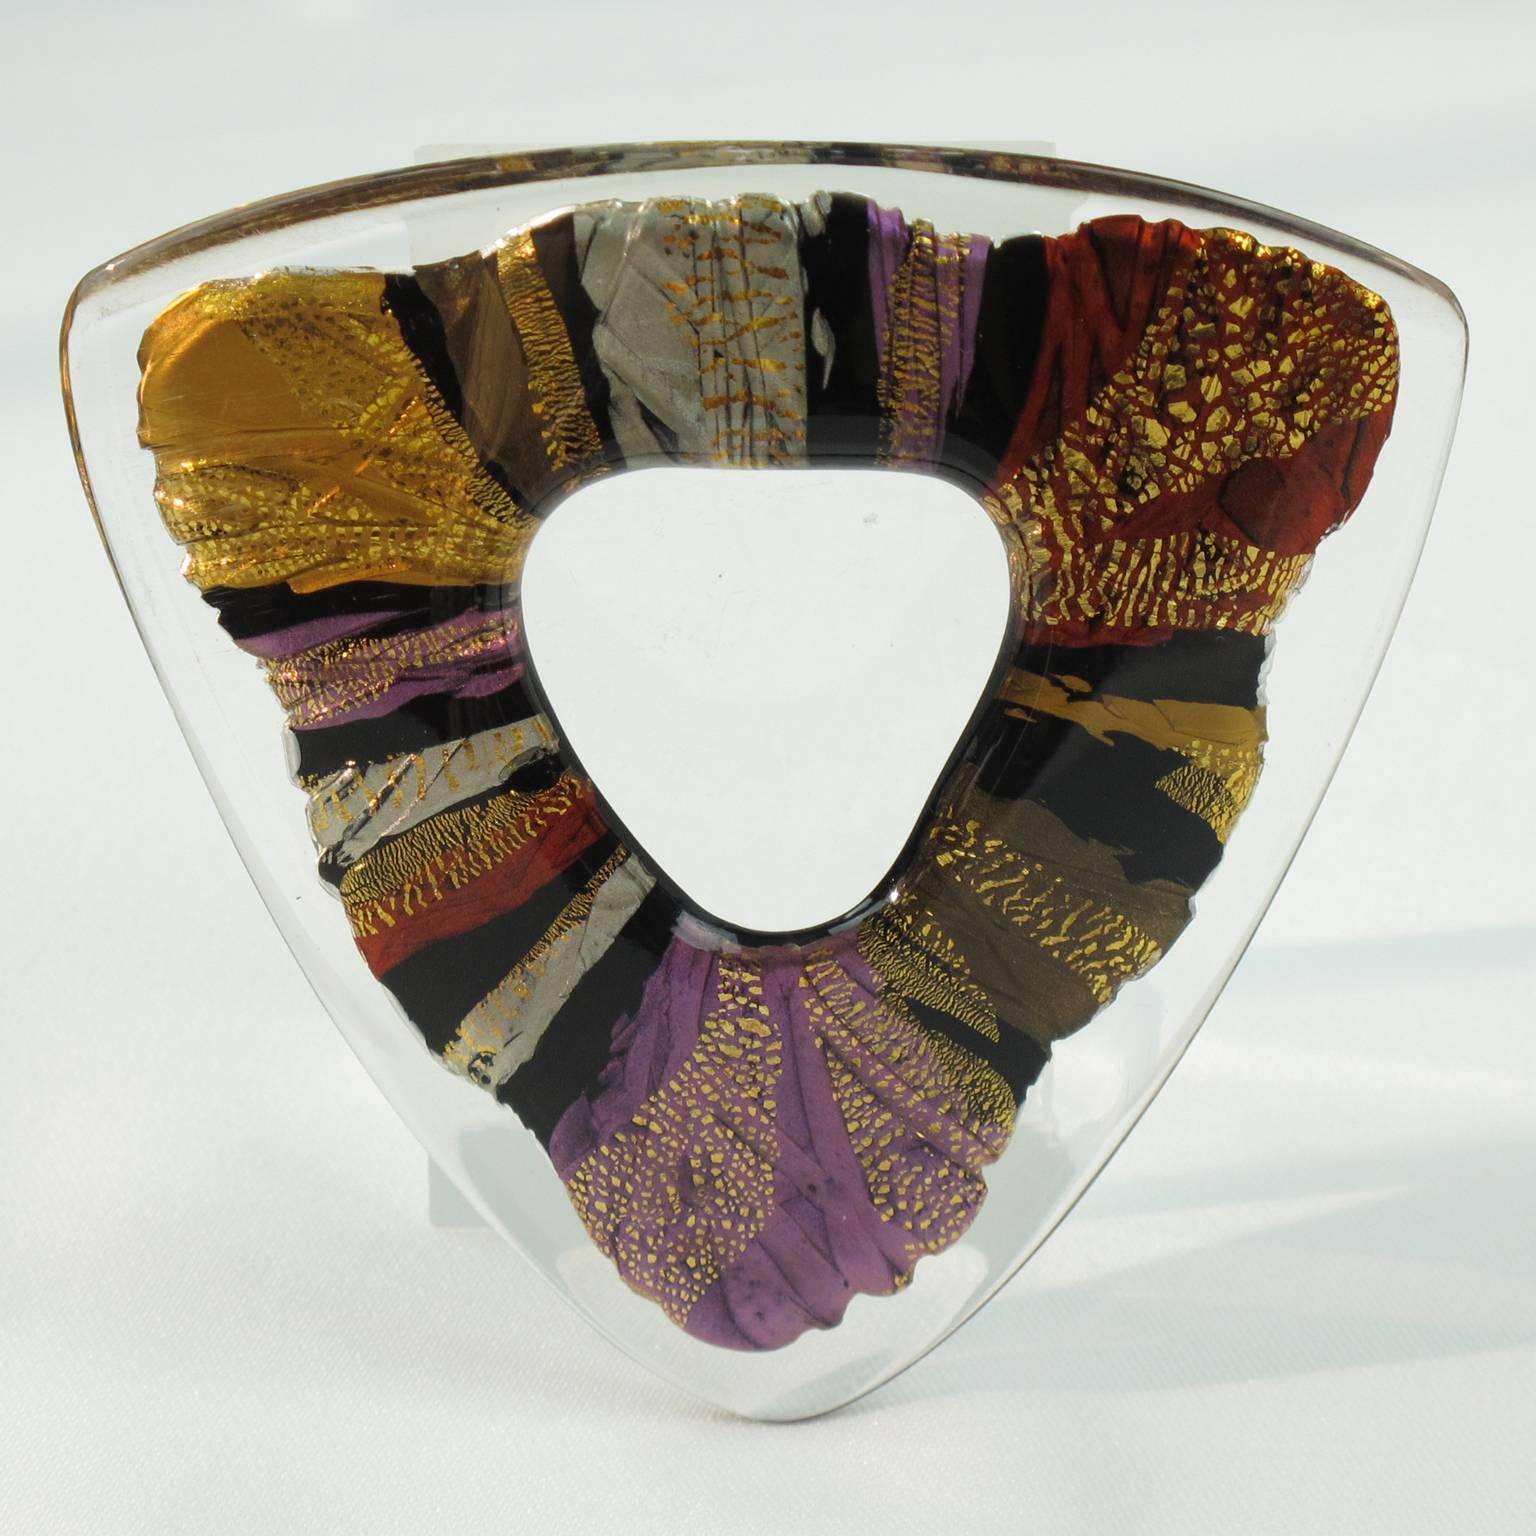 Impressive Anne and Frank Vigneri Lucite huge pin brooch from 1980s. Large geometric shape featuring a sort of heart with see thru center. Crystal clear lucite with multicolor and textured inclusions. Security closing clasp. Engraved hand-written